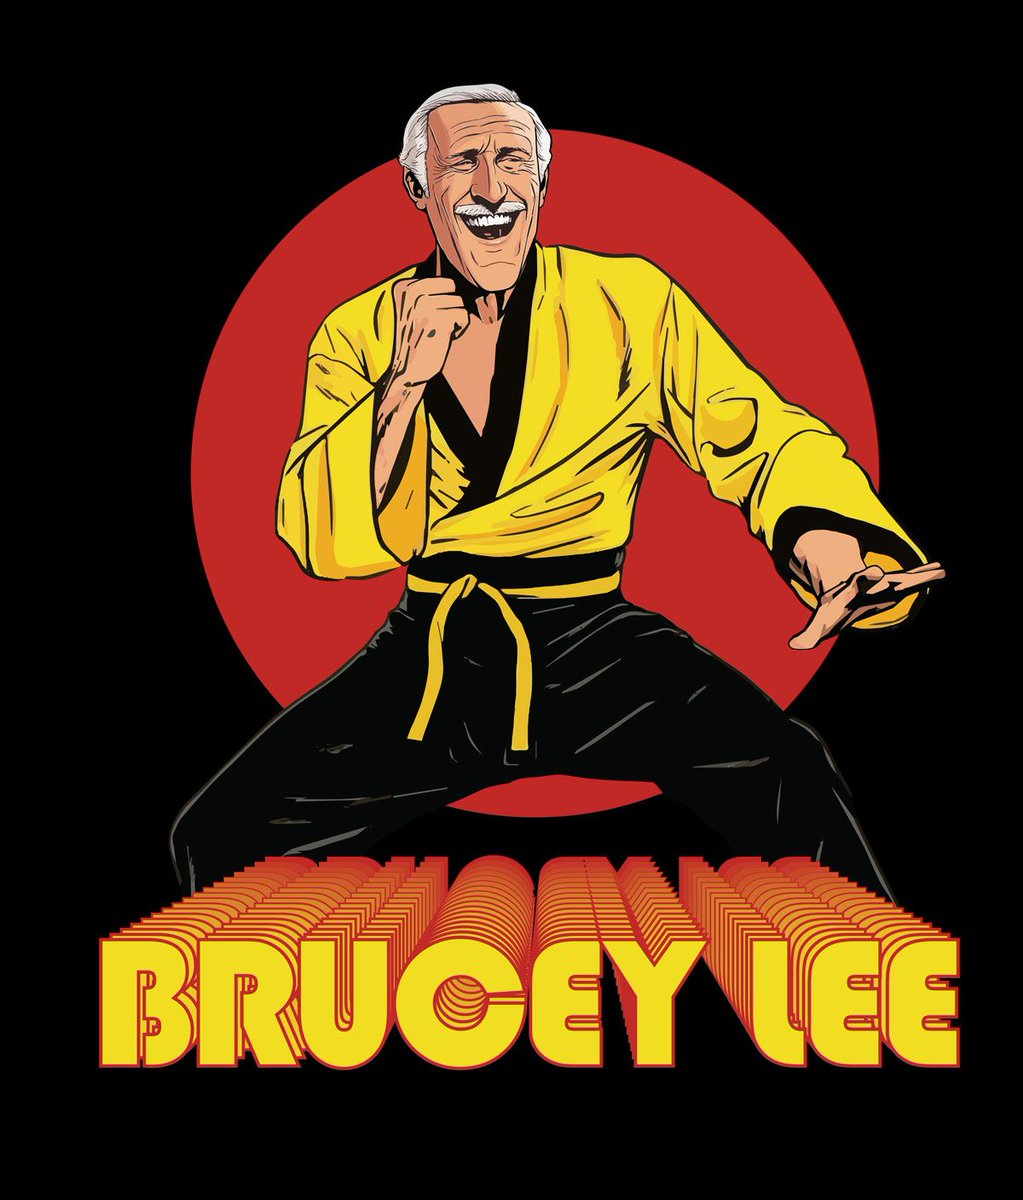 Who is the best Bruce? Forsyth or Lee? Why not both? Get your Brucey Lee T-shirt HERE >>> buff.ly/3WnQZof